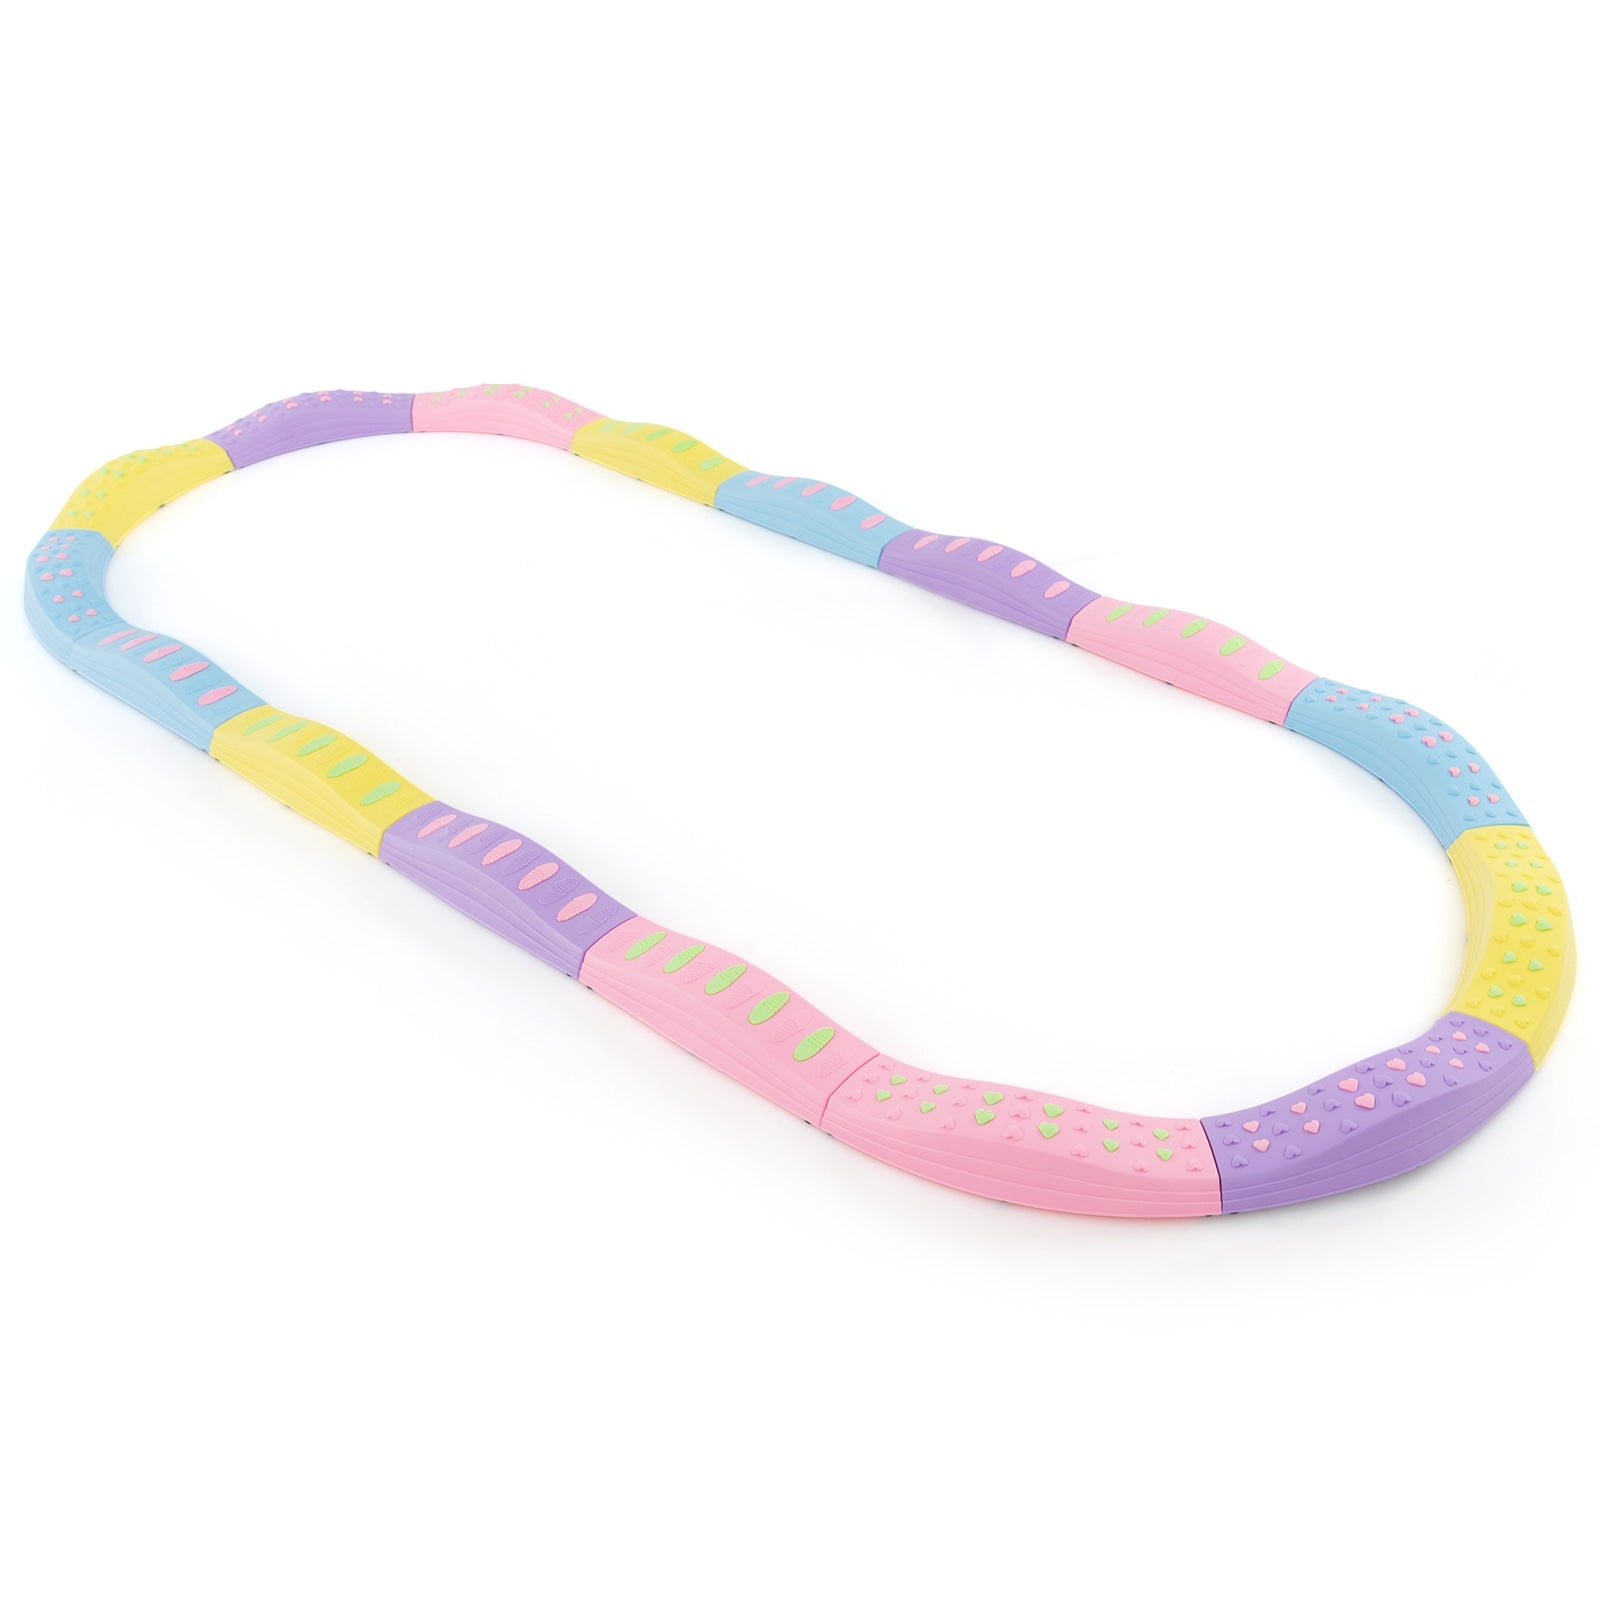 Colorful Kids Wavy Balance Beam with Textured Surface and Non-slip Foot Pads, Pink & Purple - Gallery Canada